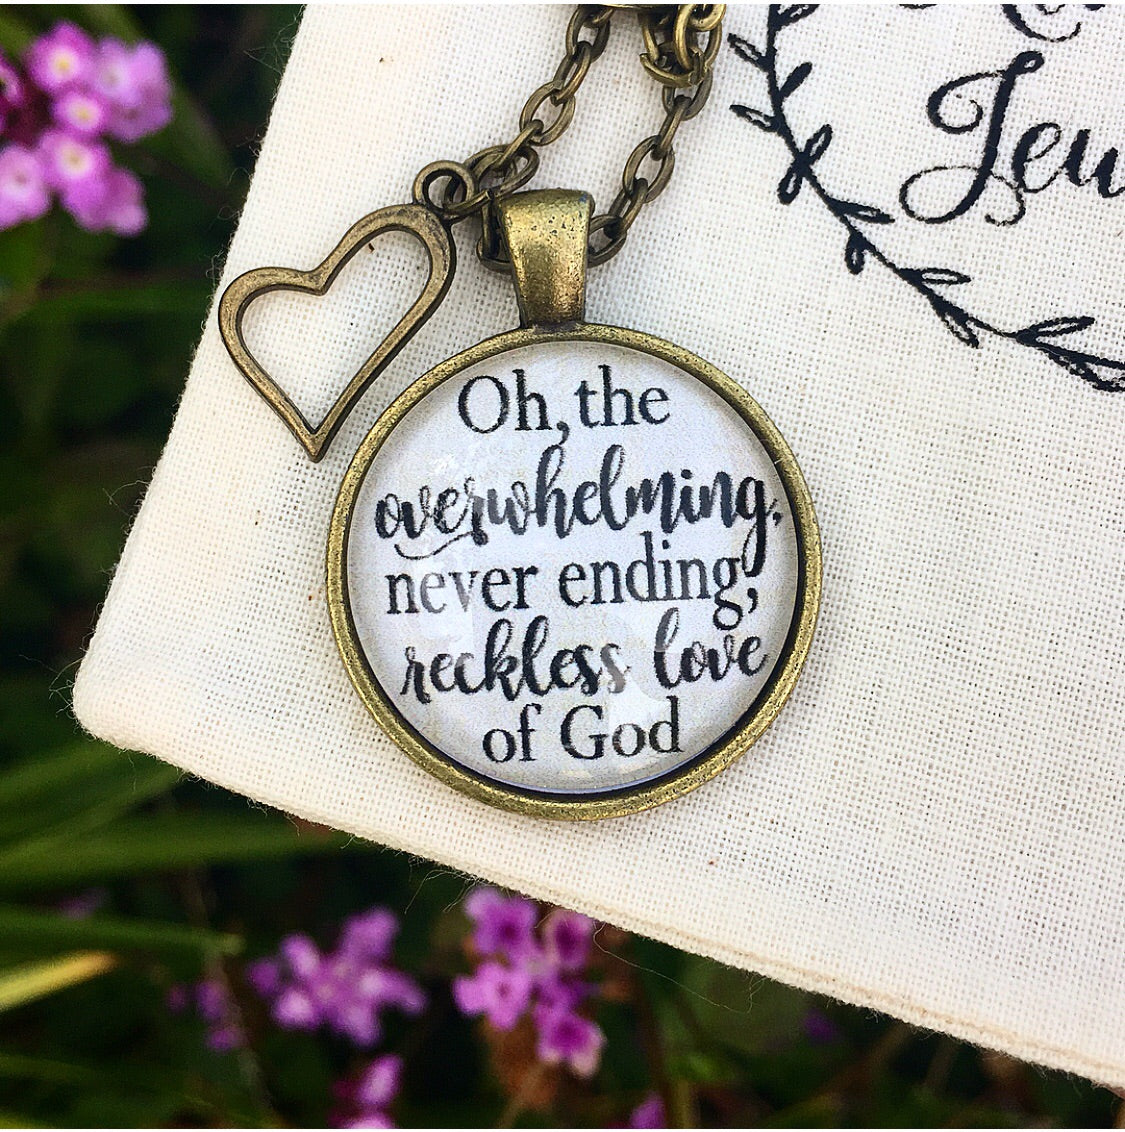 Reckless Love of God Necklace – Redeemed Jewelry